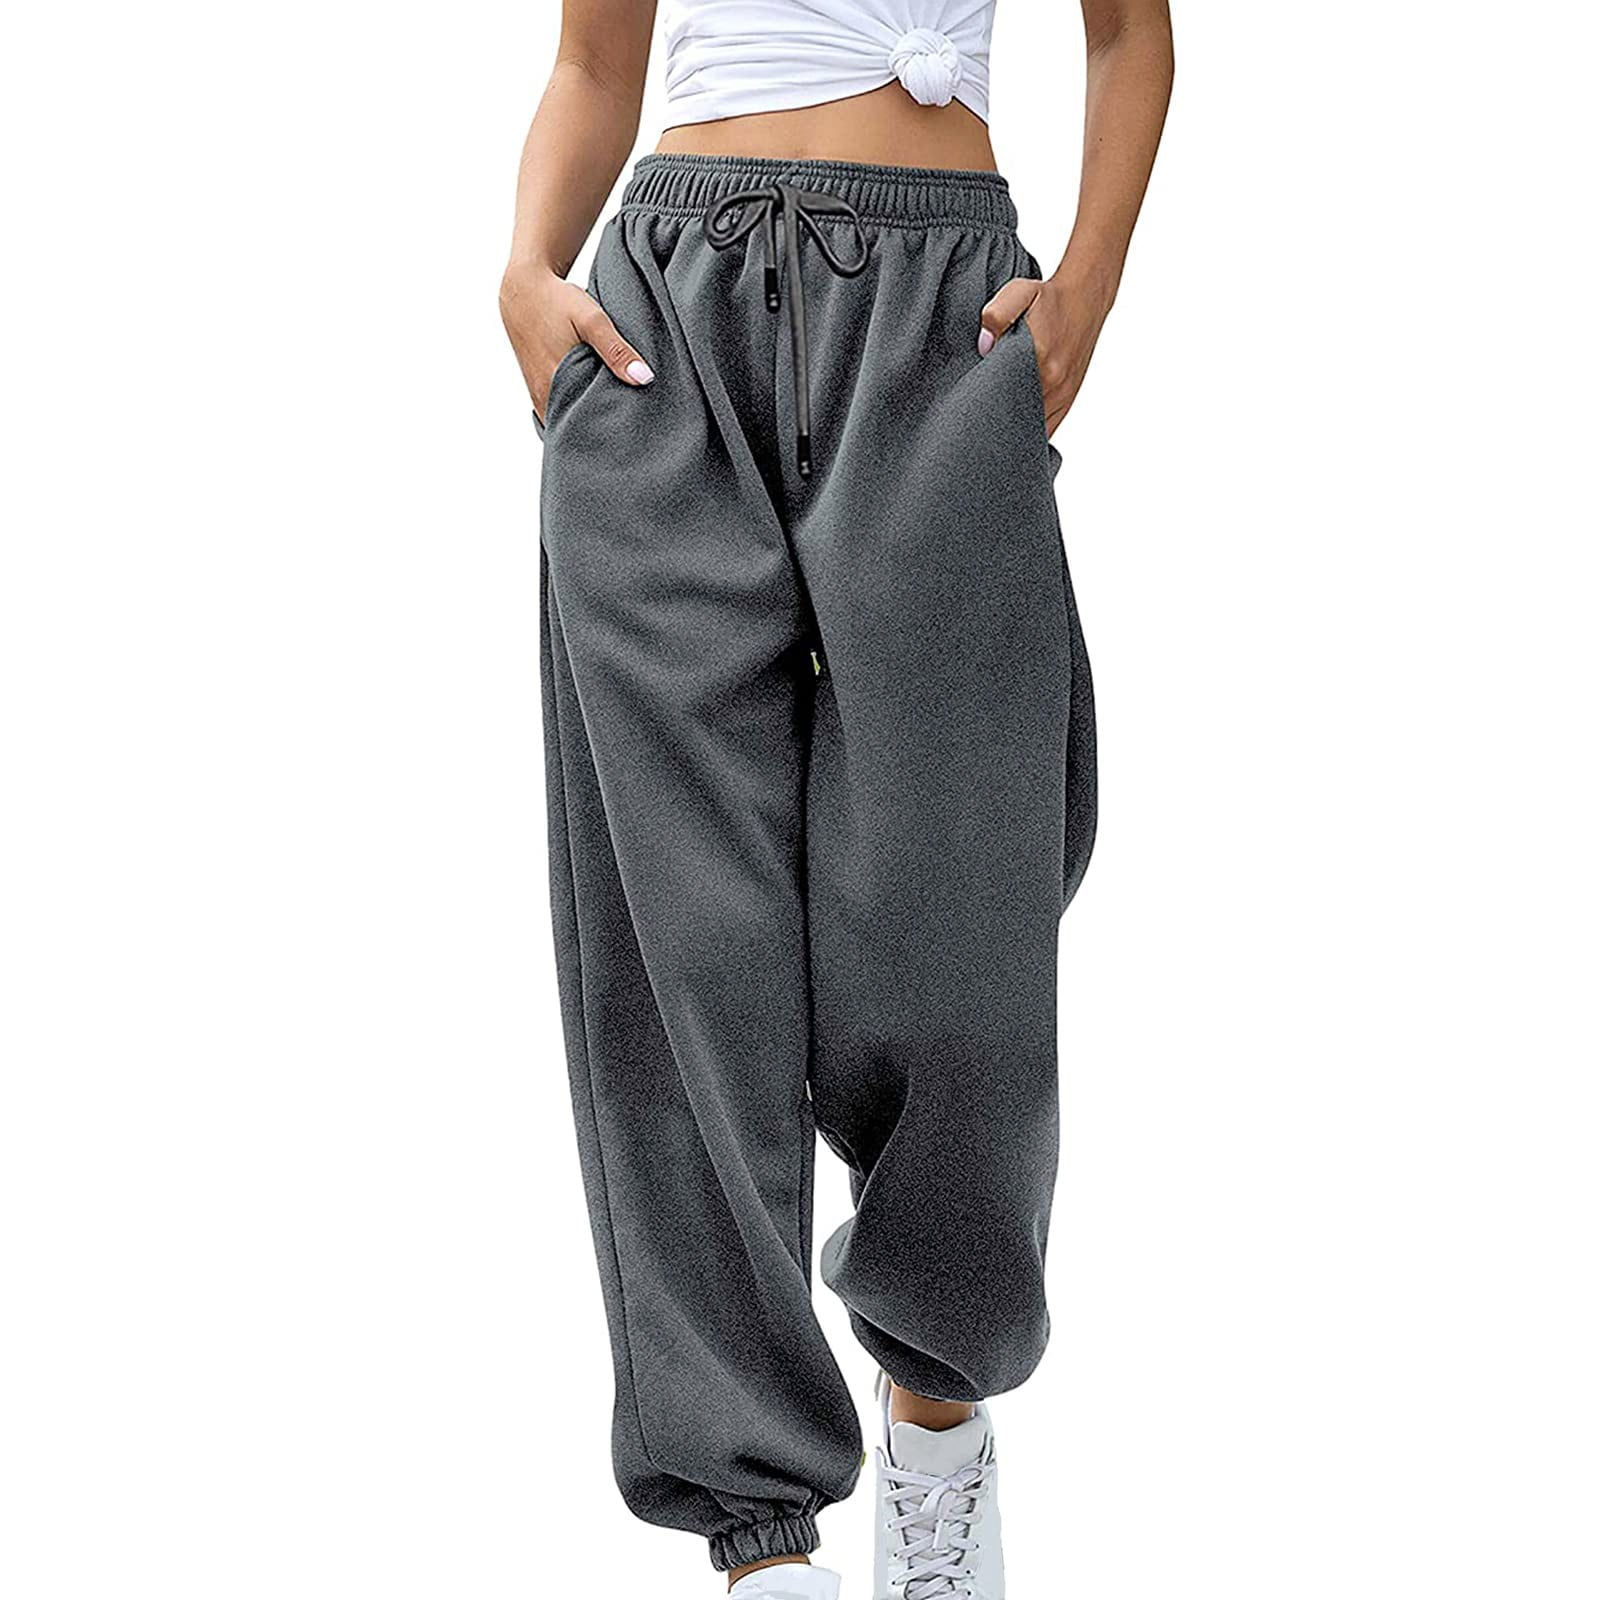 HSMQHJWE Sweatpants For Women Womens Joggers With Pockets Lounge Pants For Yoga  Workout Running Sweat Pants Women Casual 